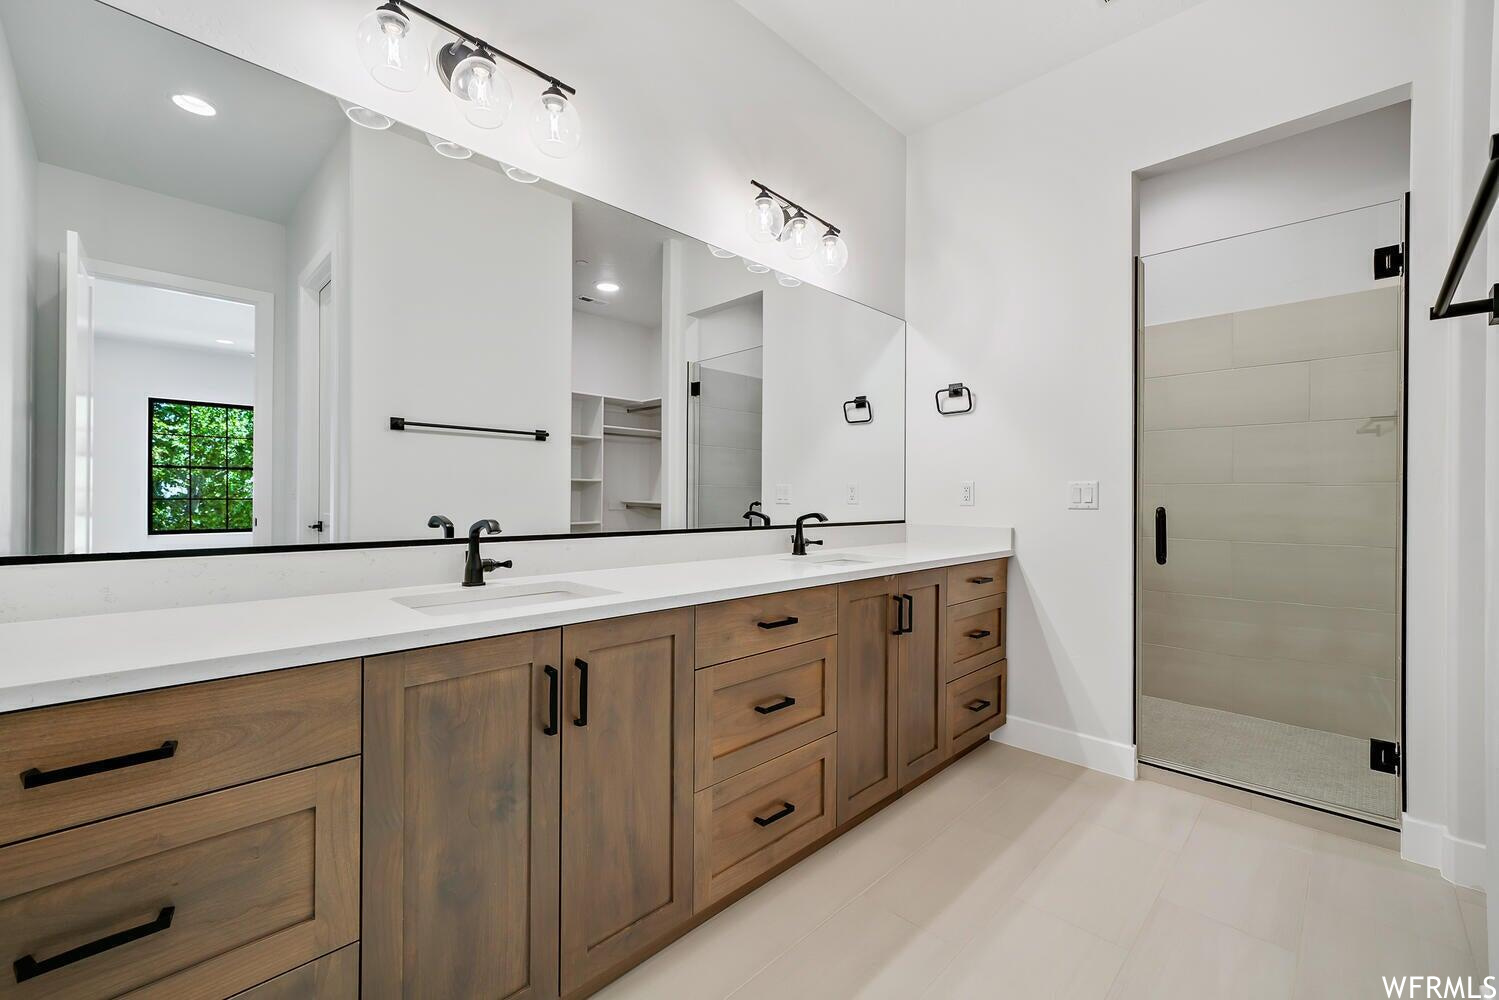 Bathroom featuring tile floors, natural light, shower with glass door, mirror, and dual bowl vanity